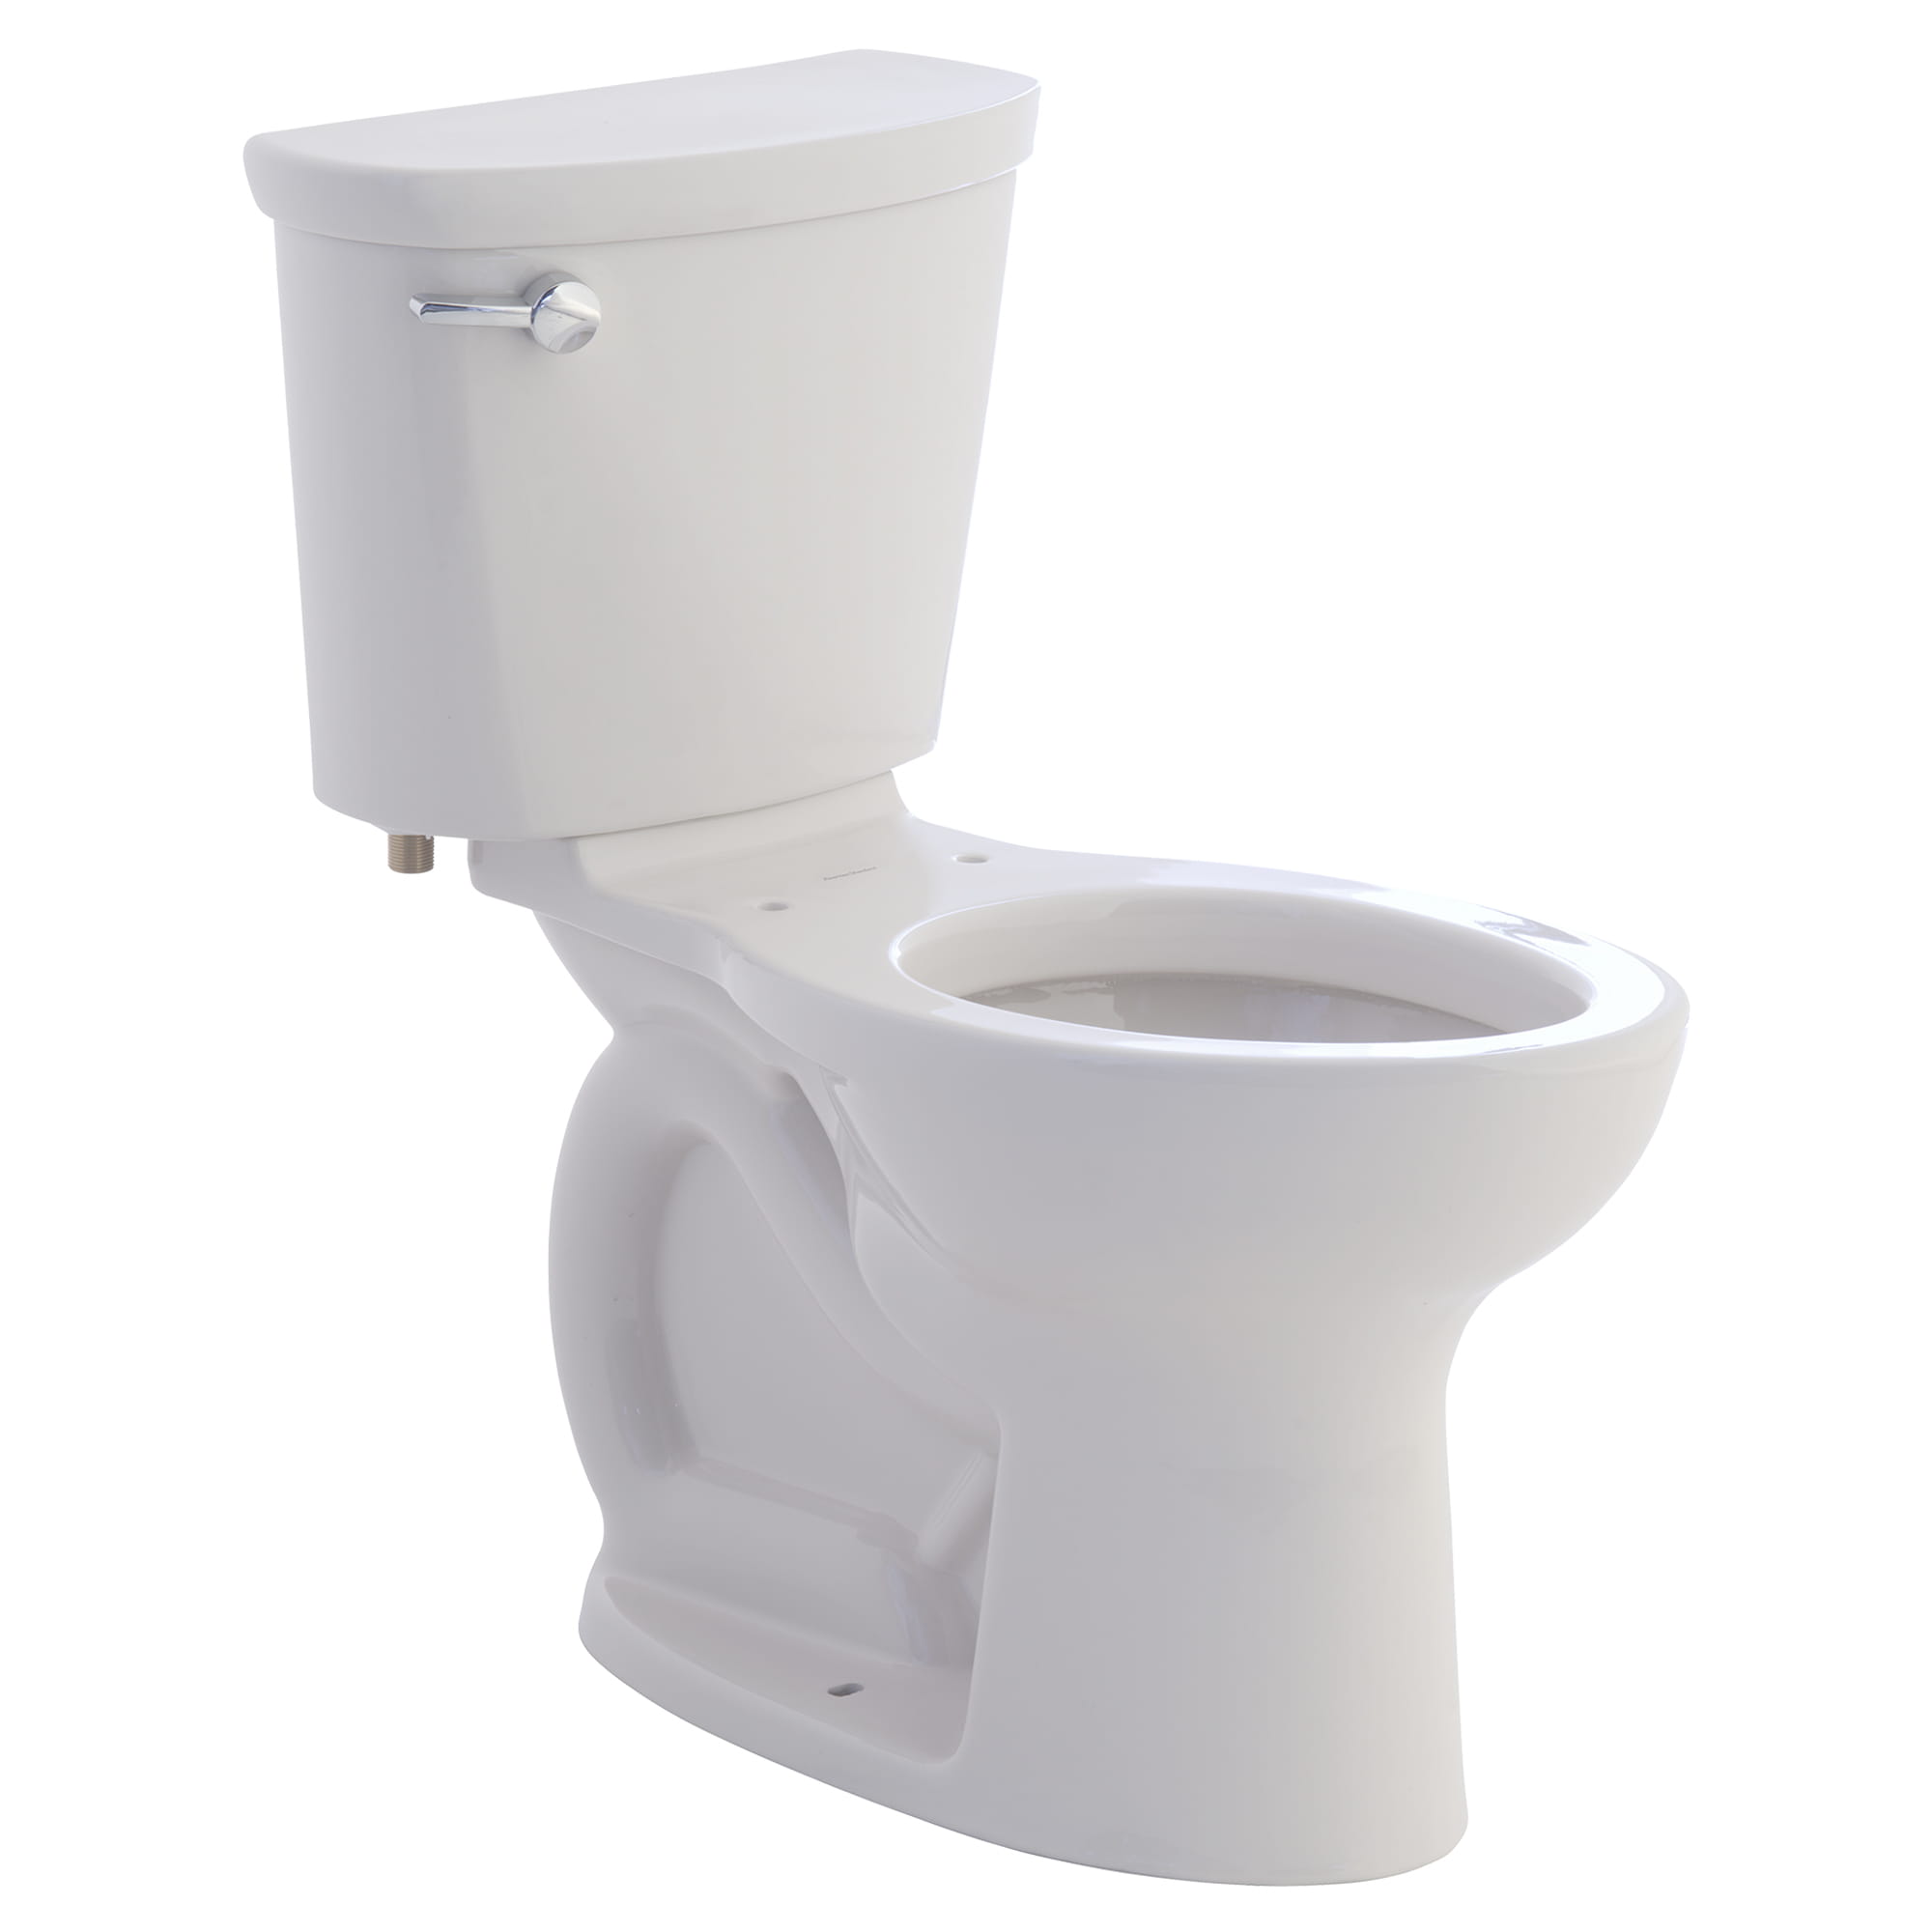 Cadet PRO Two Piece 128 gpf 48 Lpf Compact Chair Height Elongated Toilet Less Seat BONE